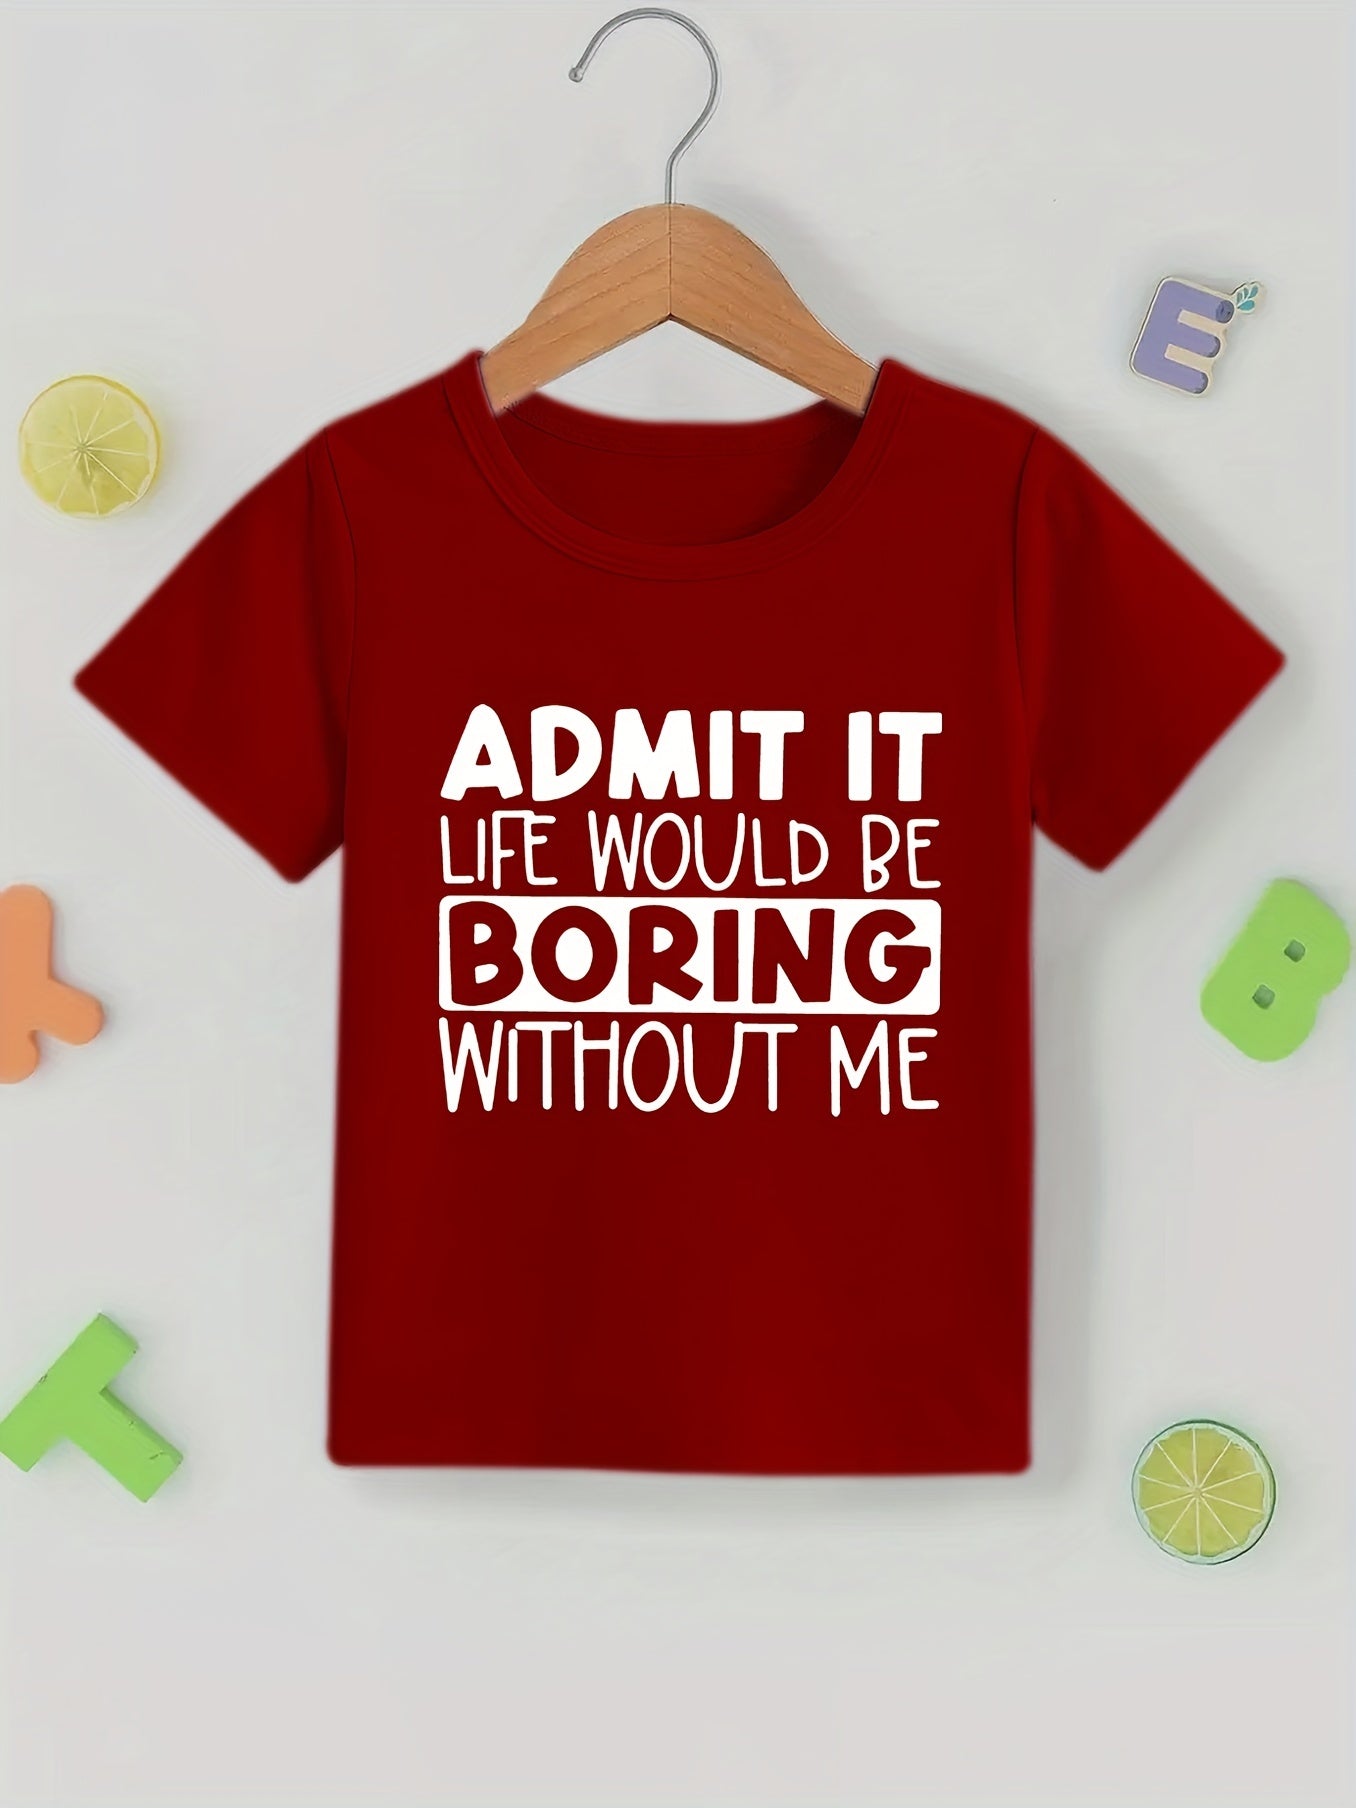 Kids Letter "ADMIT IT" Graphic T-Shirt Casual Crew Neck Tees Top For Summer Toddler Girls And Boys Clothes